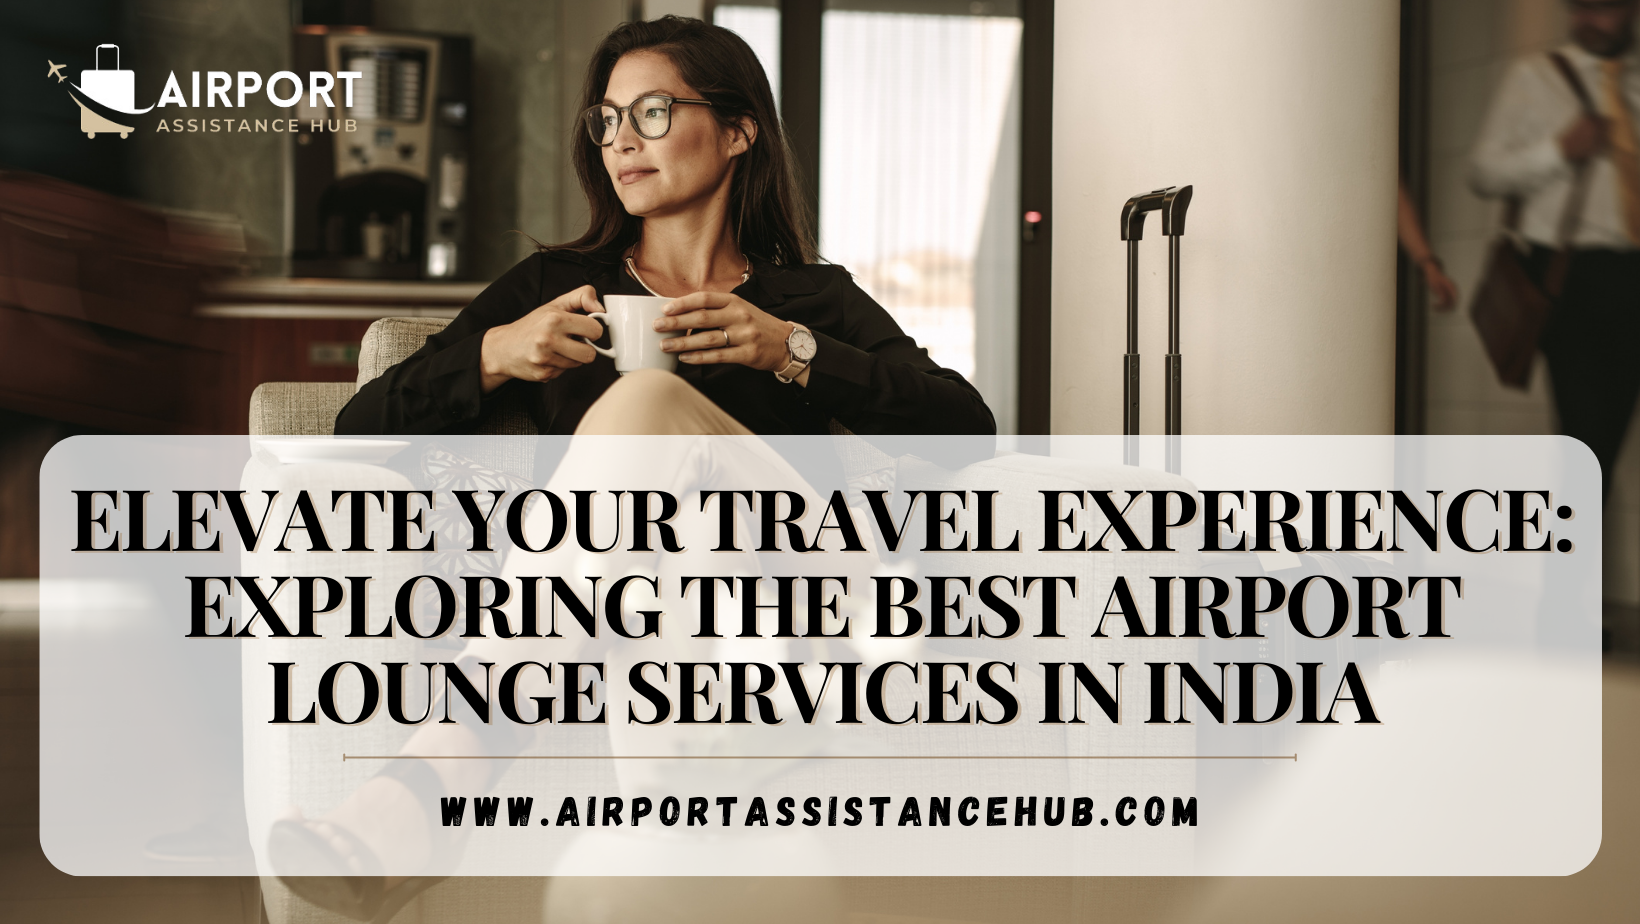 Airport Lounge Services in India